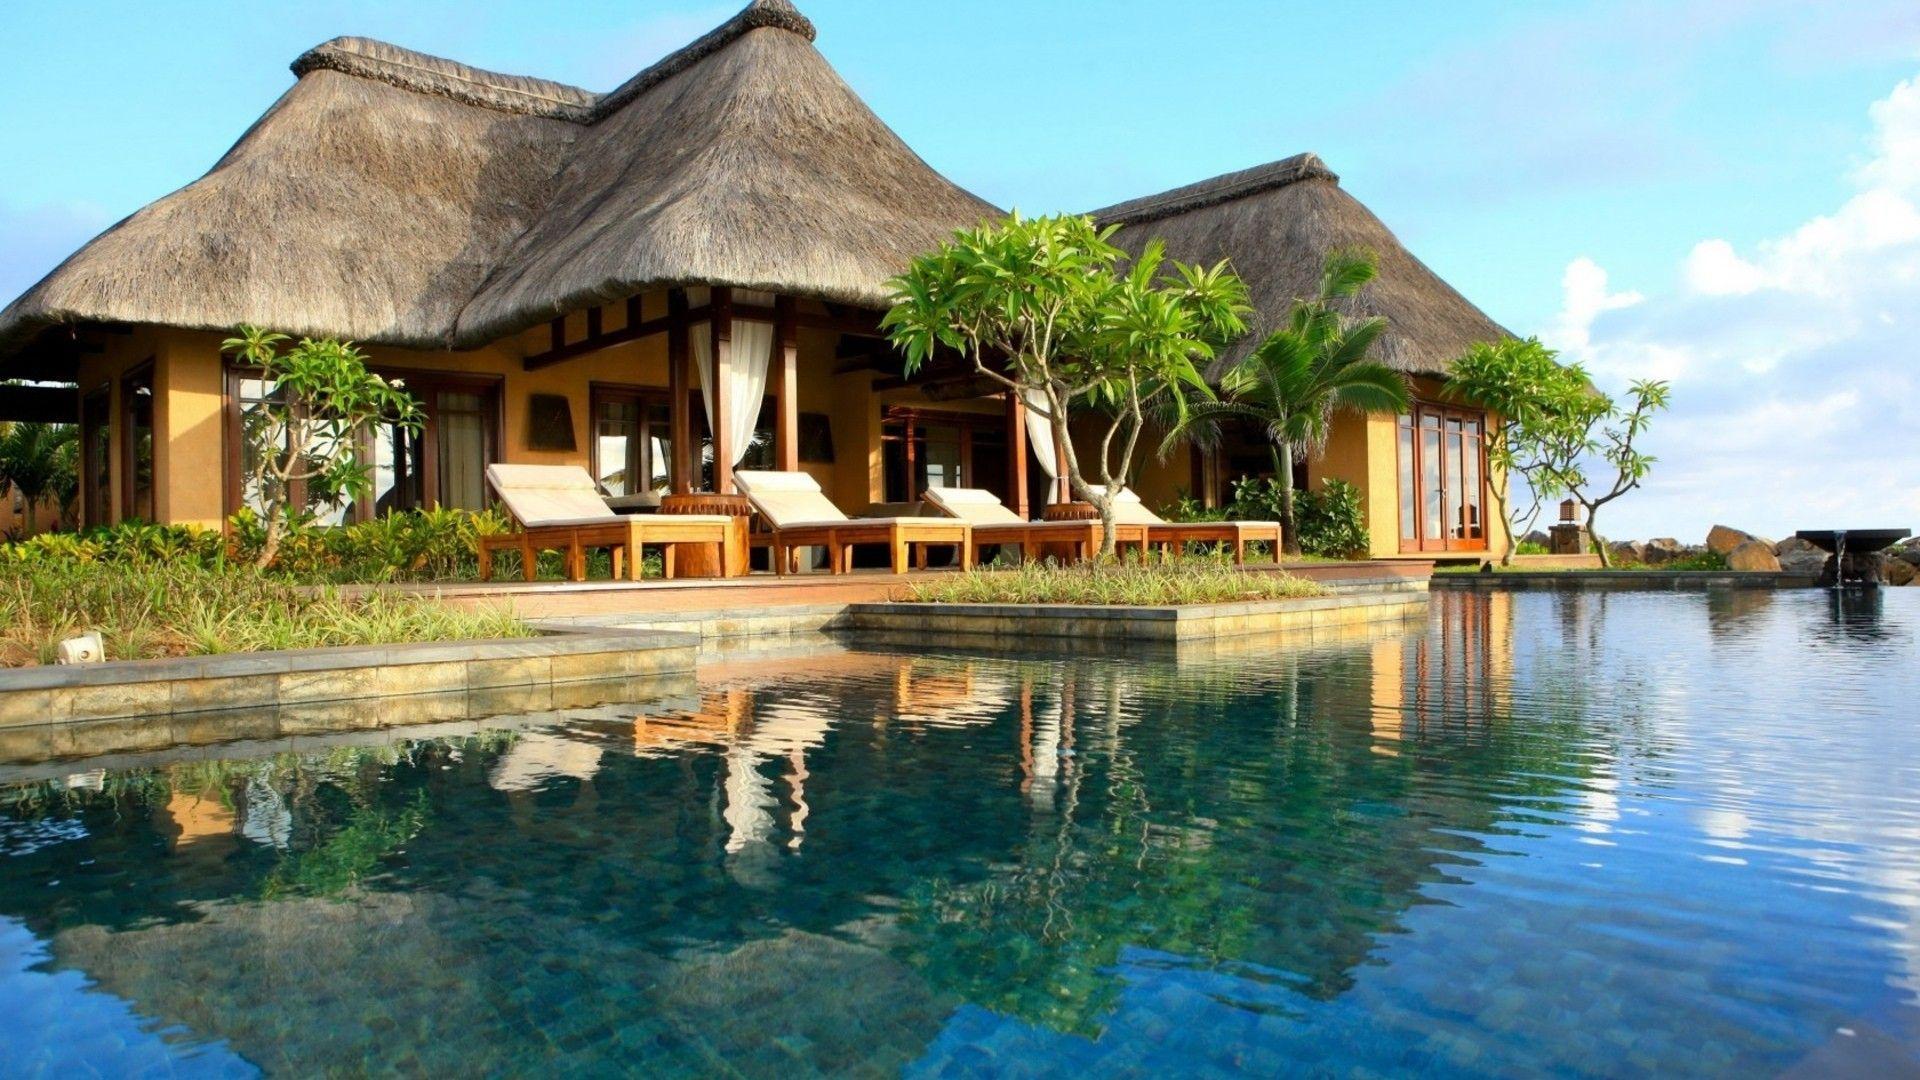 Download Wallpaper pool house hotel indonesia shanti maurice